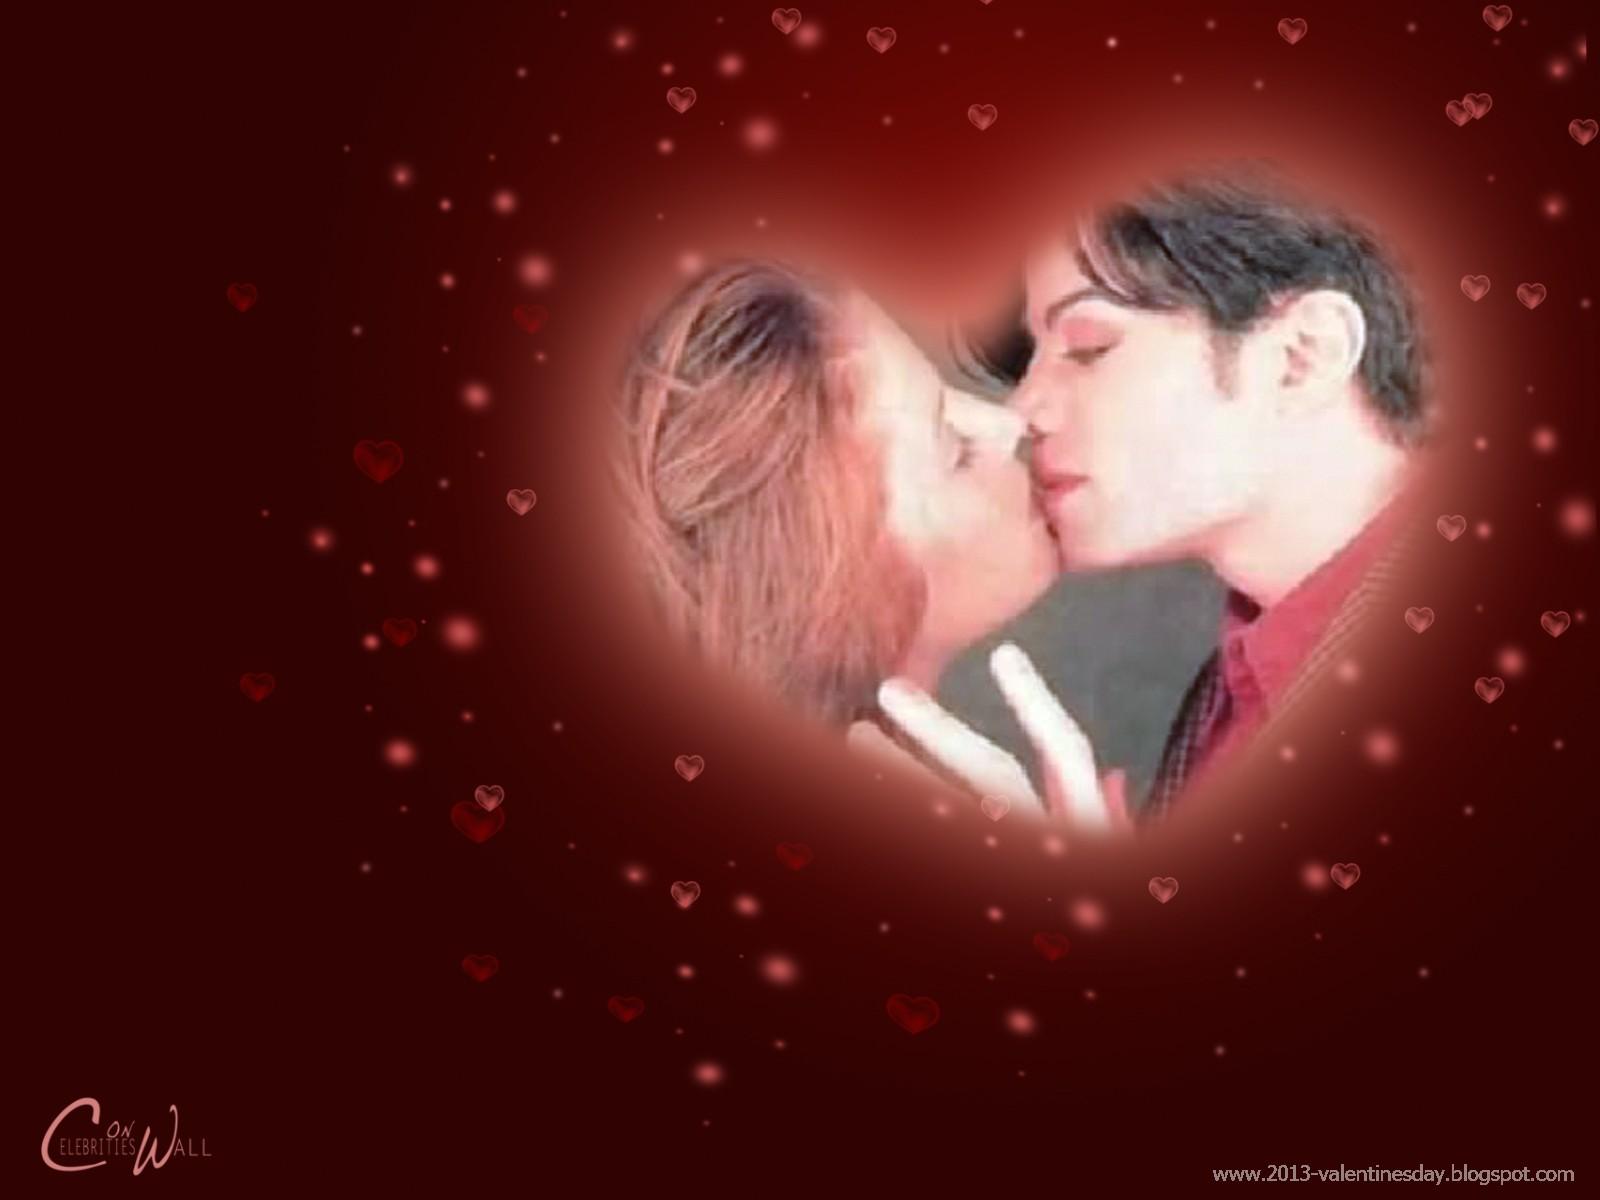 Love Kiss Wallpaper, image collections of wallpaper